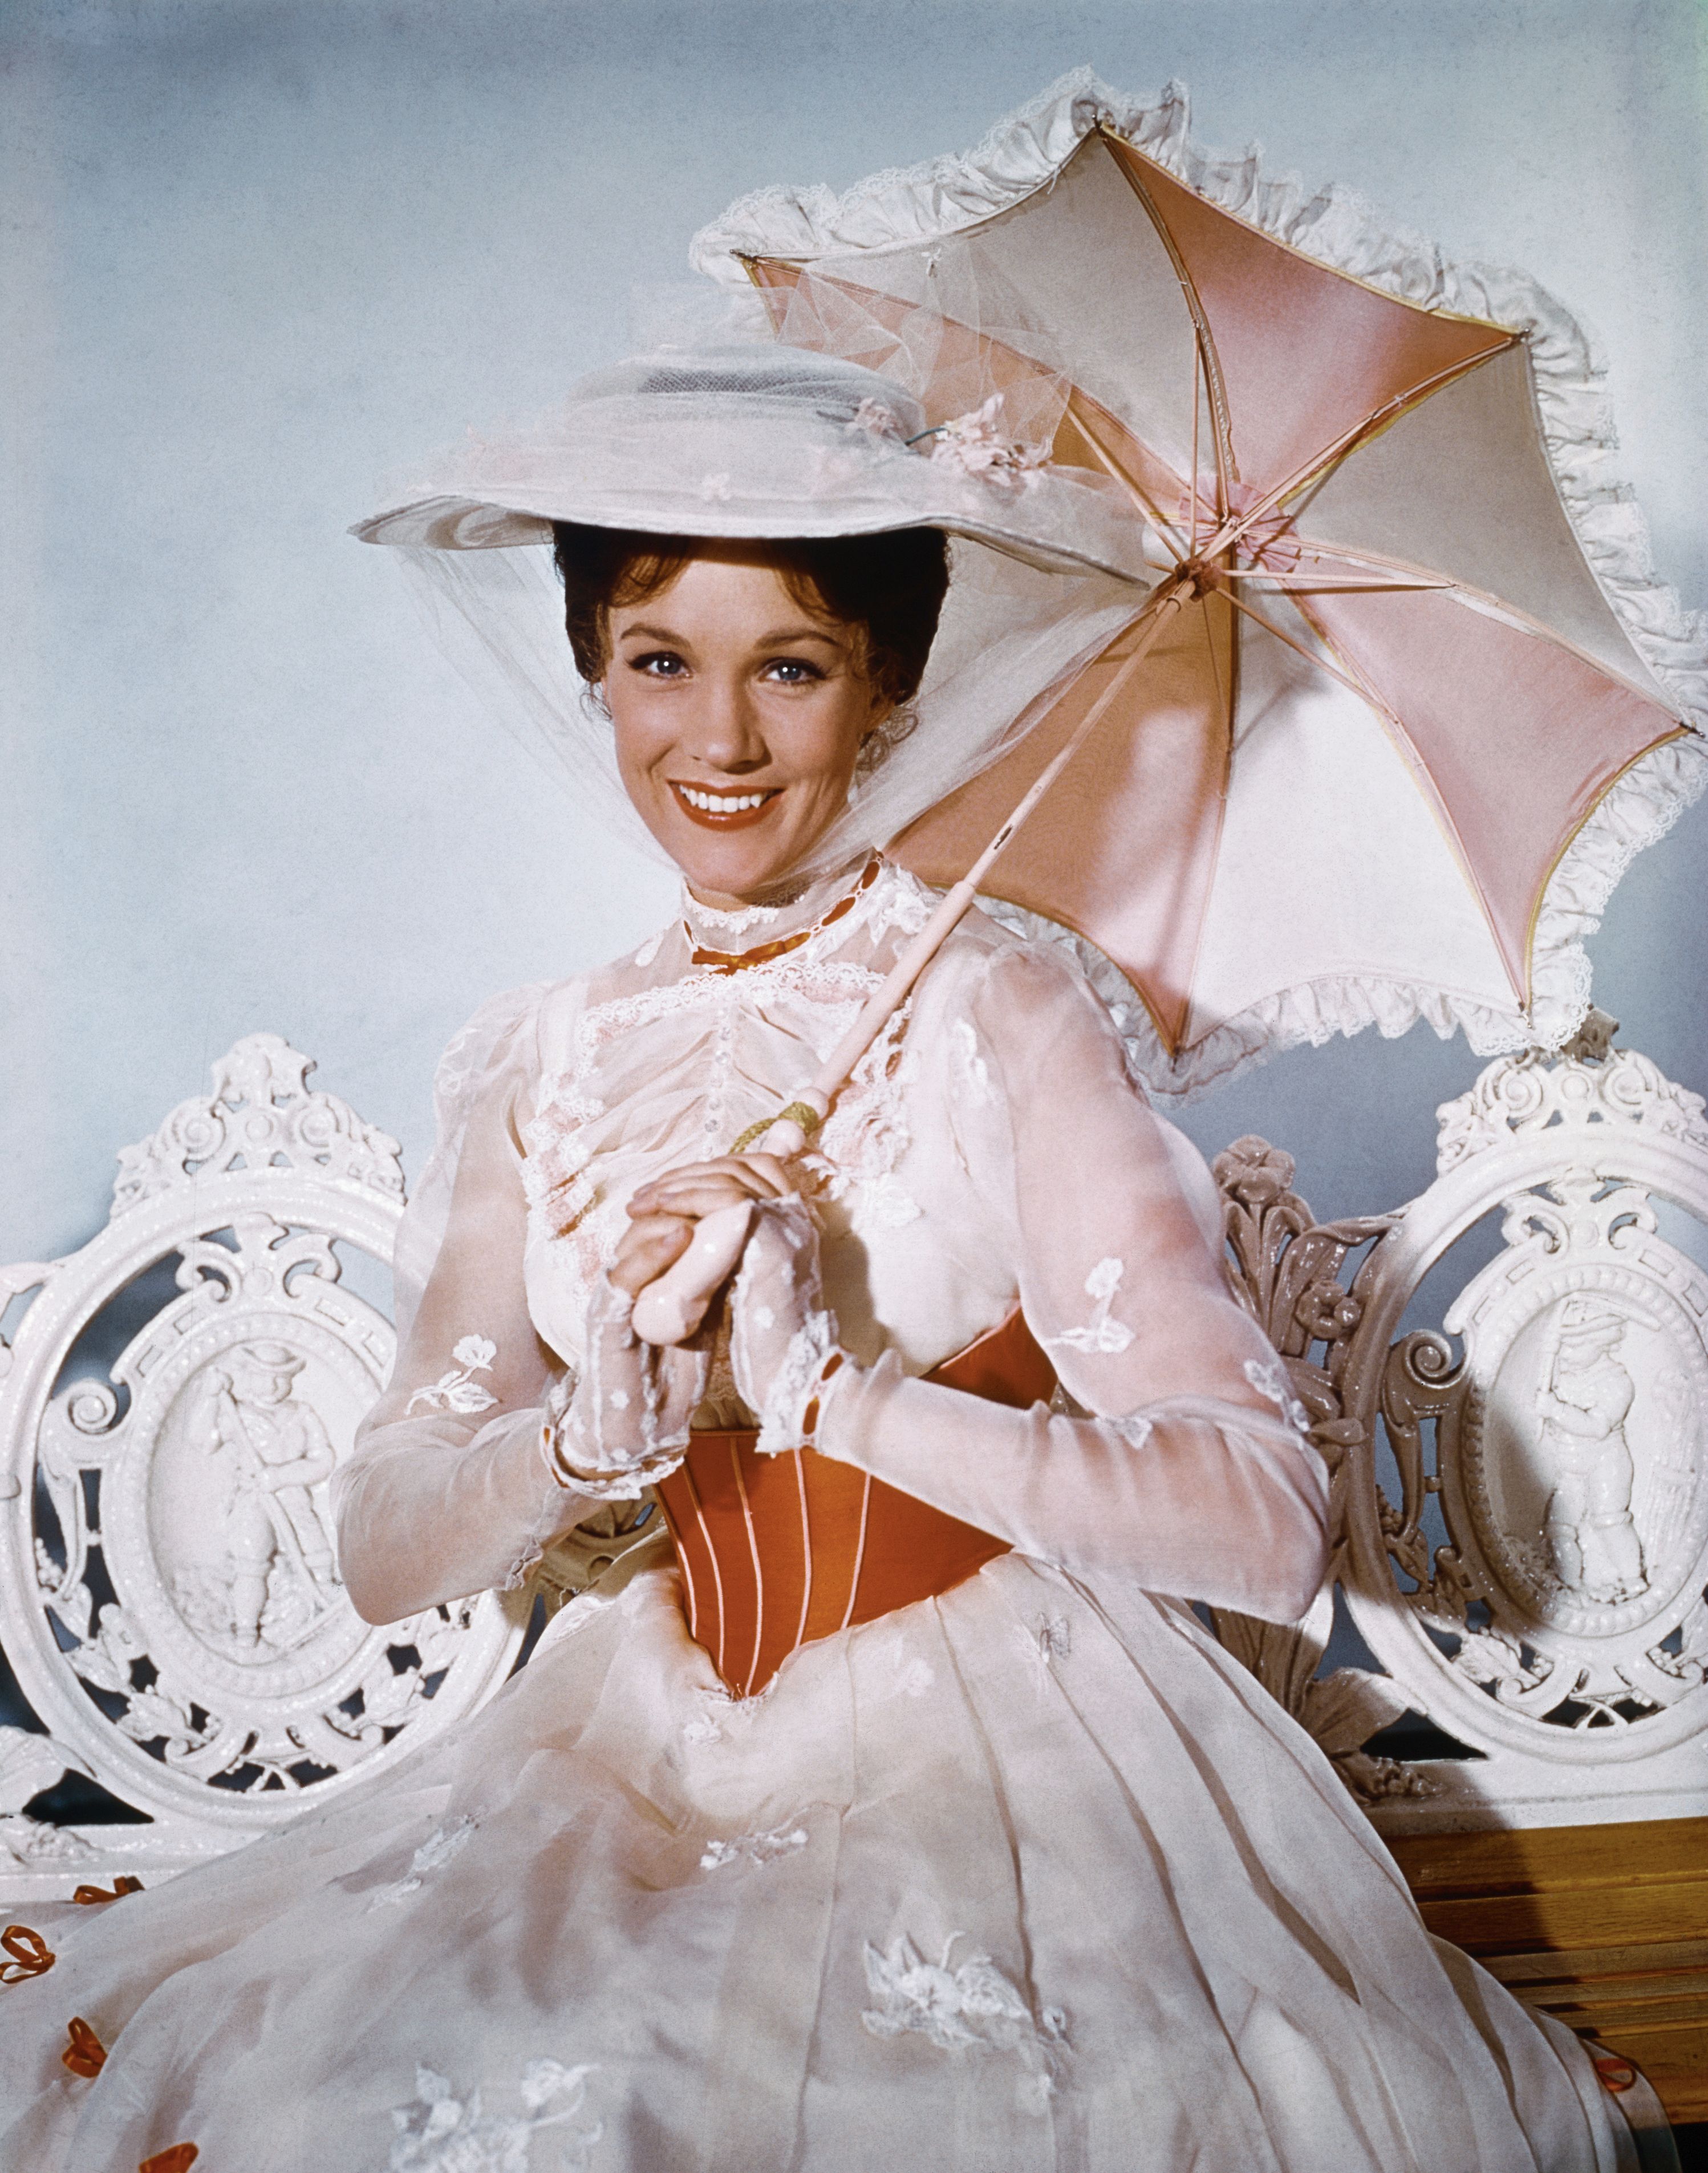 Julie Andrews posing as her character, Mary Poppins, for a photoshoot on February 18, 1965. | Photo: Getty Images